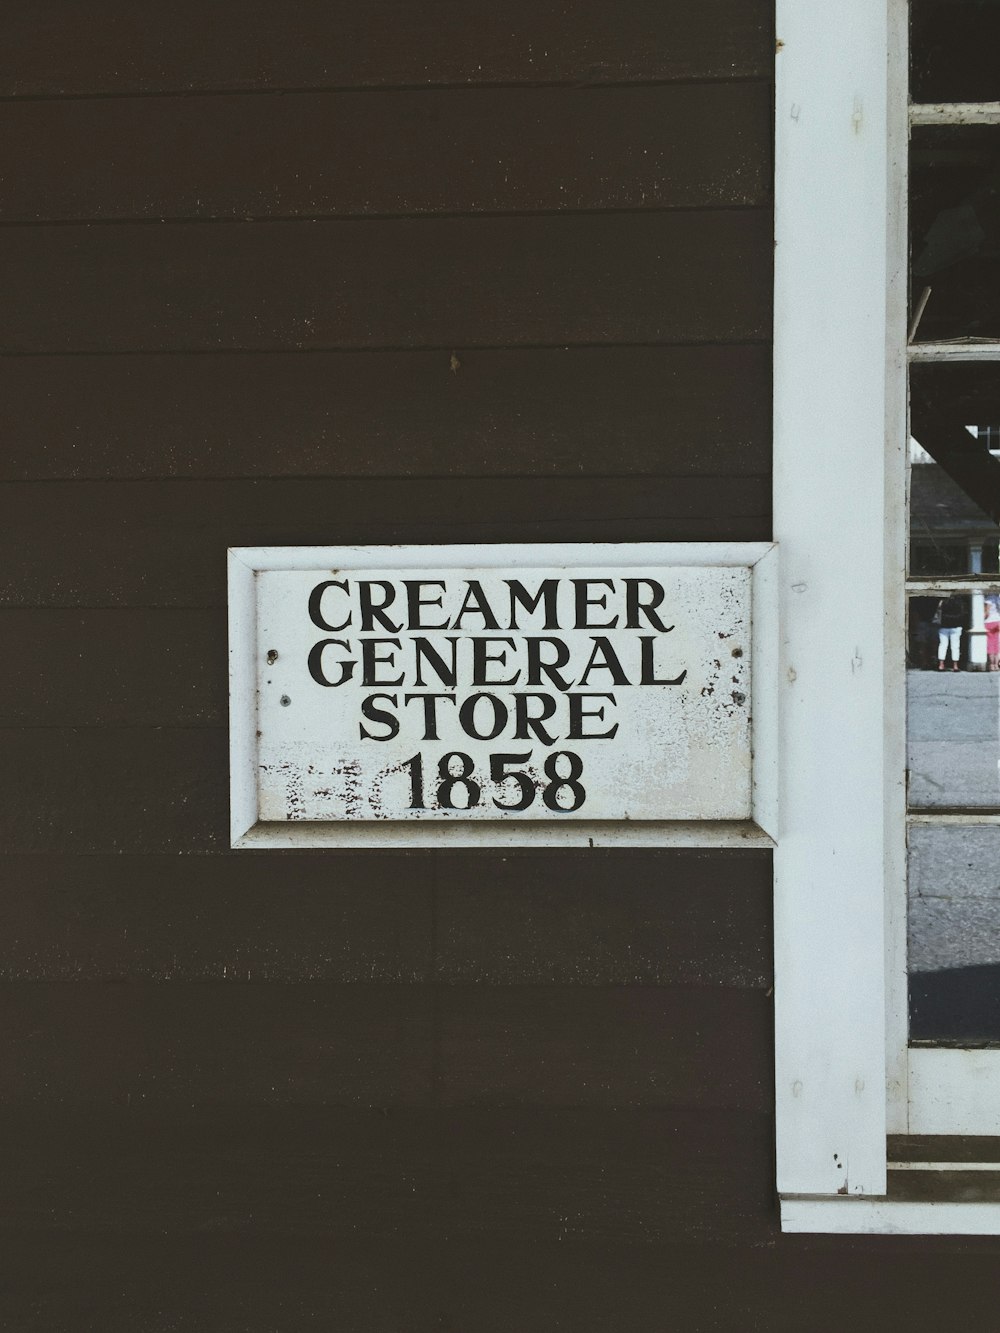 1858 Creamer General Store signage on wooden wall